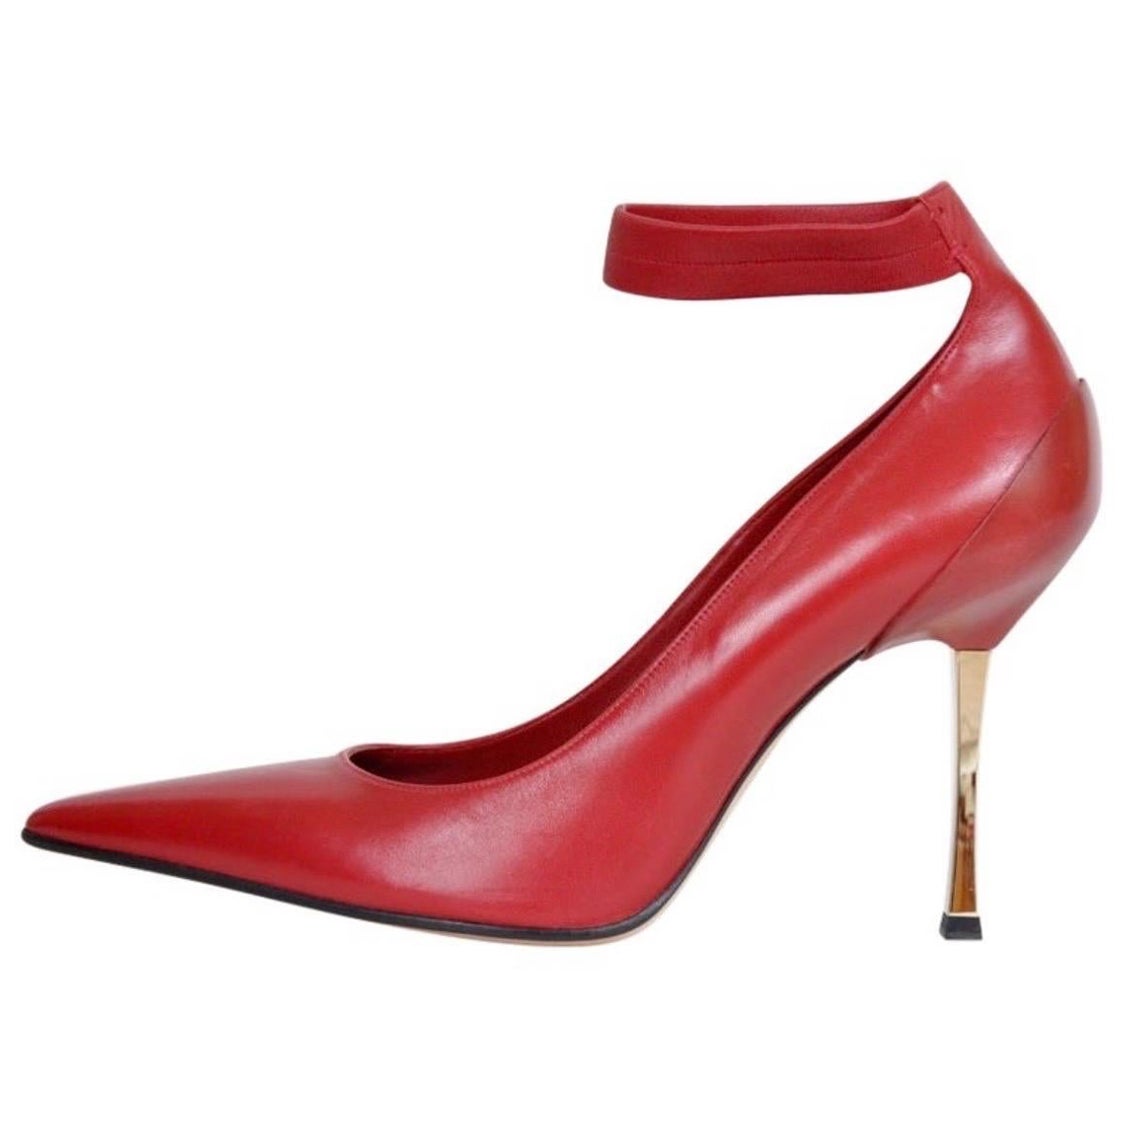 F/W 1997 Tom Ford for Gucci Red Leather Ankle-Strap Stiletto Shoes 40 - 10 *NEW! For Sale